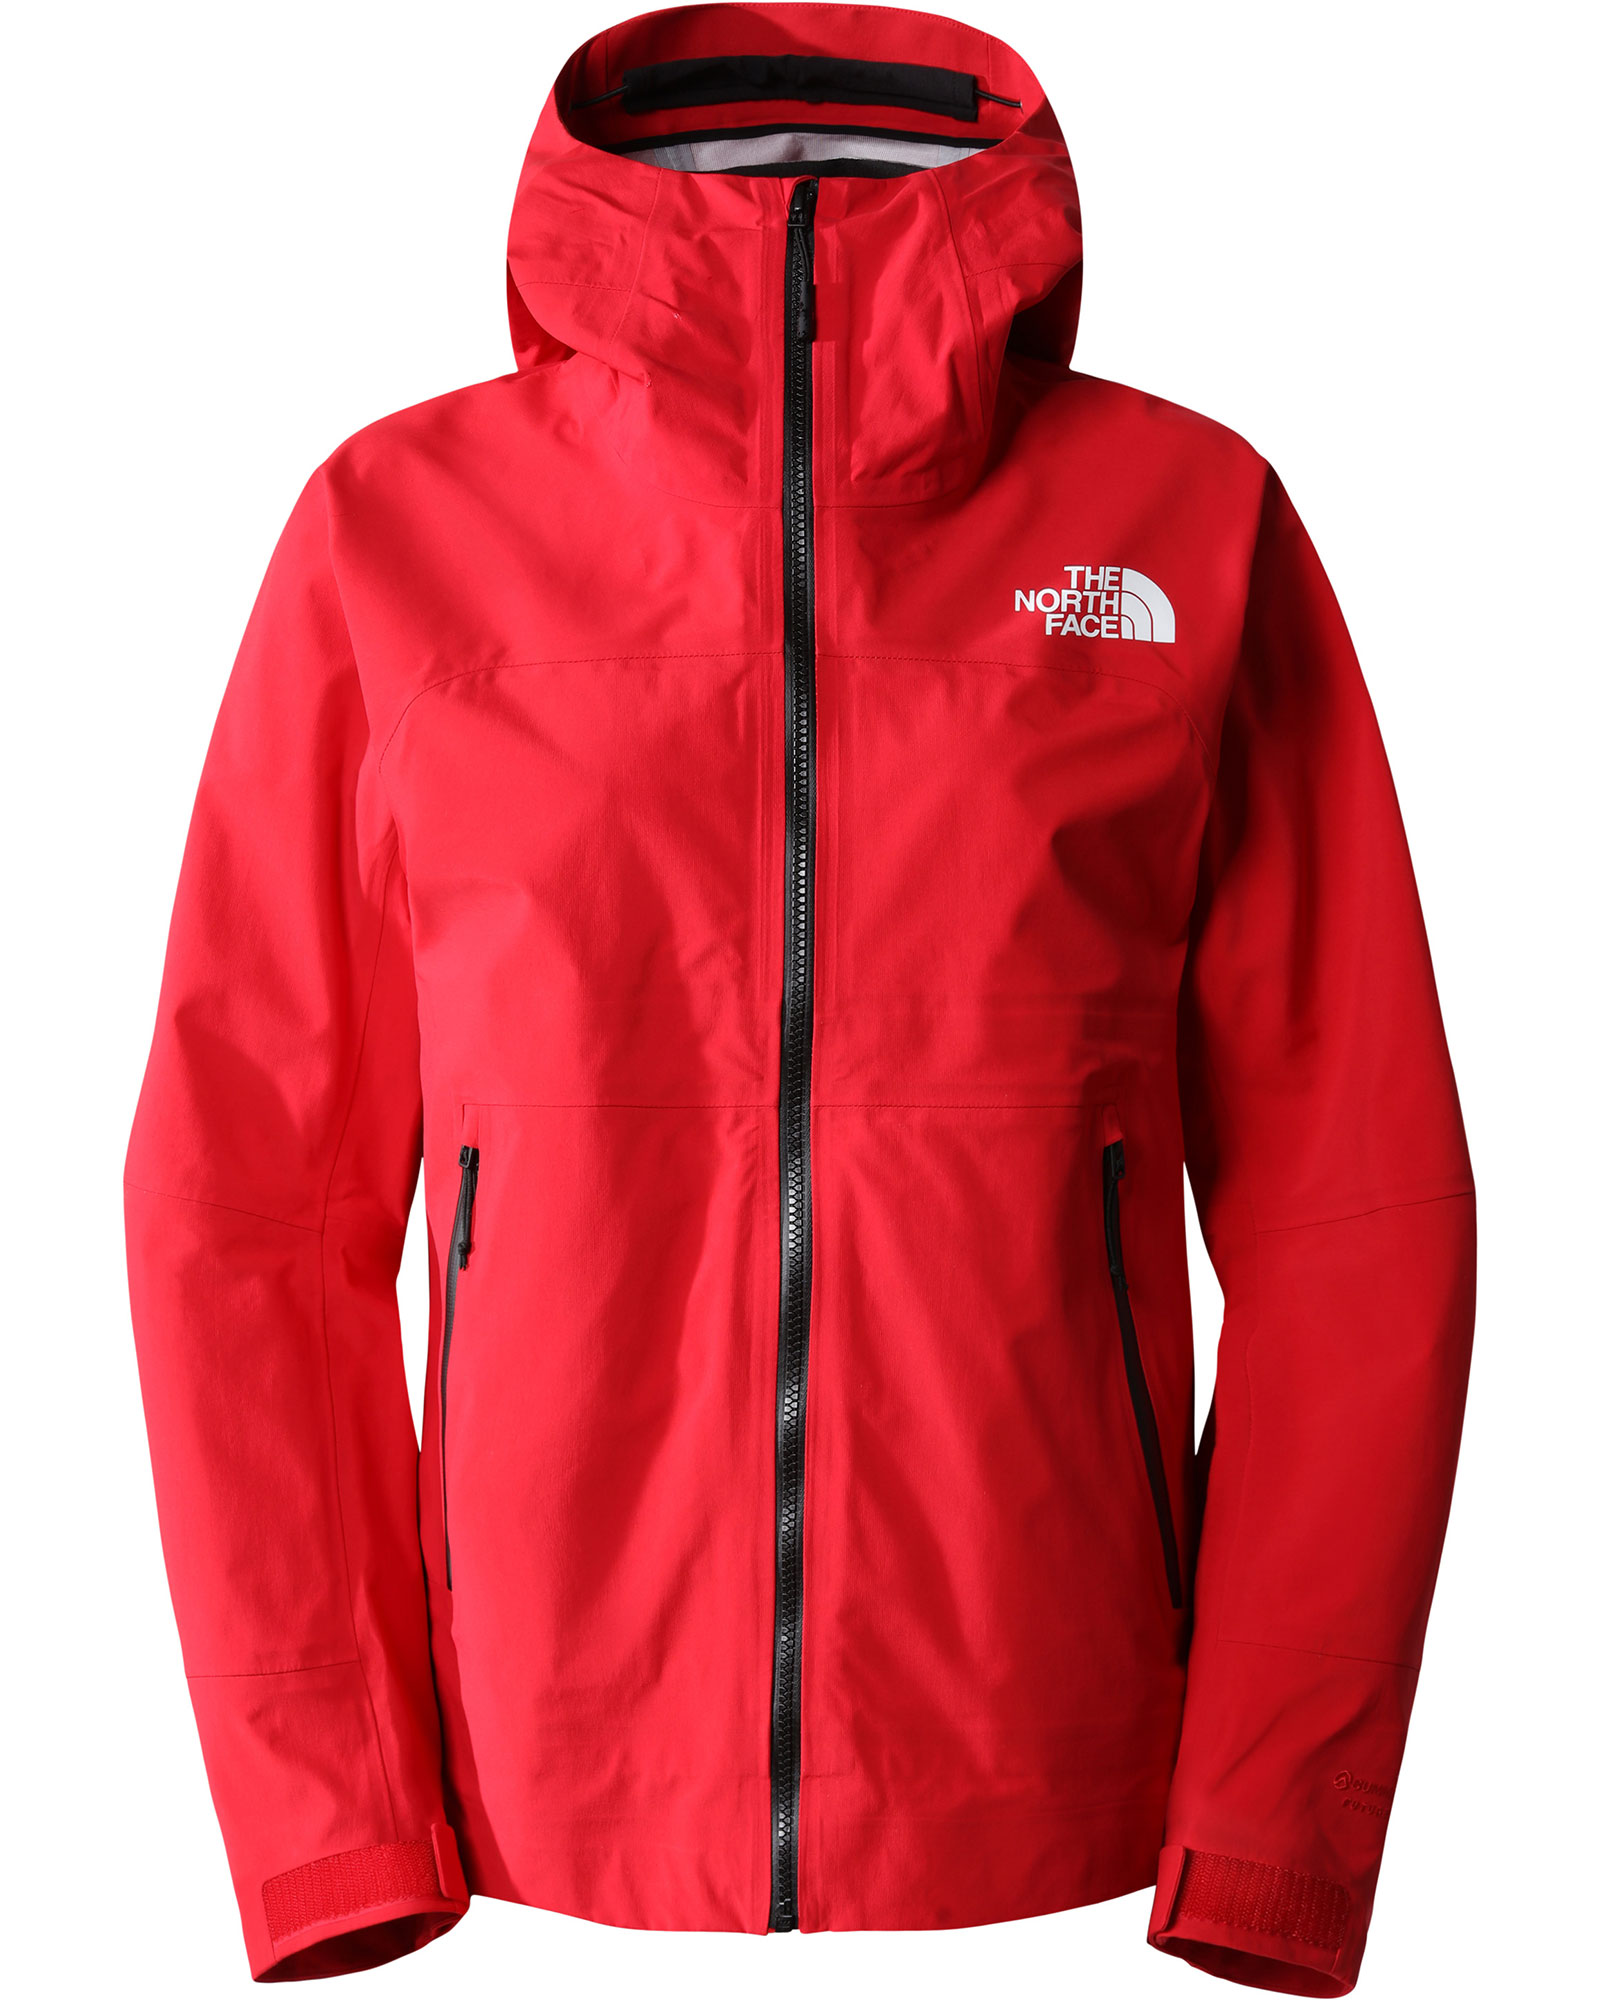 The North Face Summit Chamlang FUTURELIGHT Women’s Jacket - TNF Red M